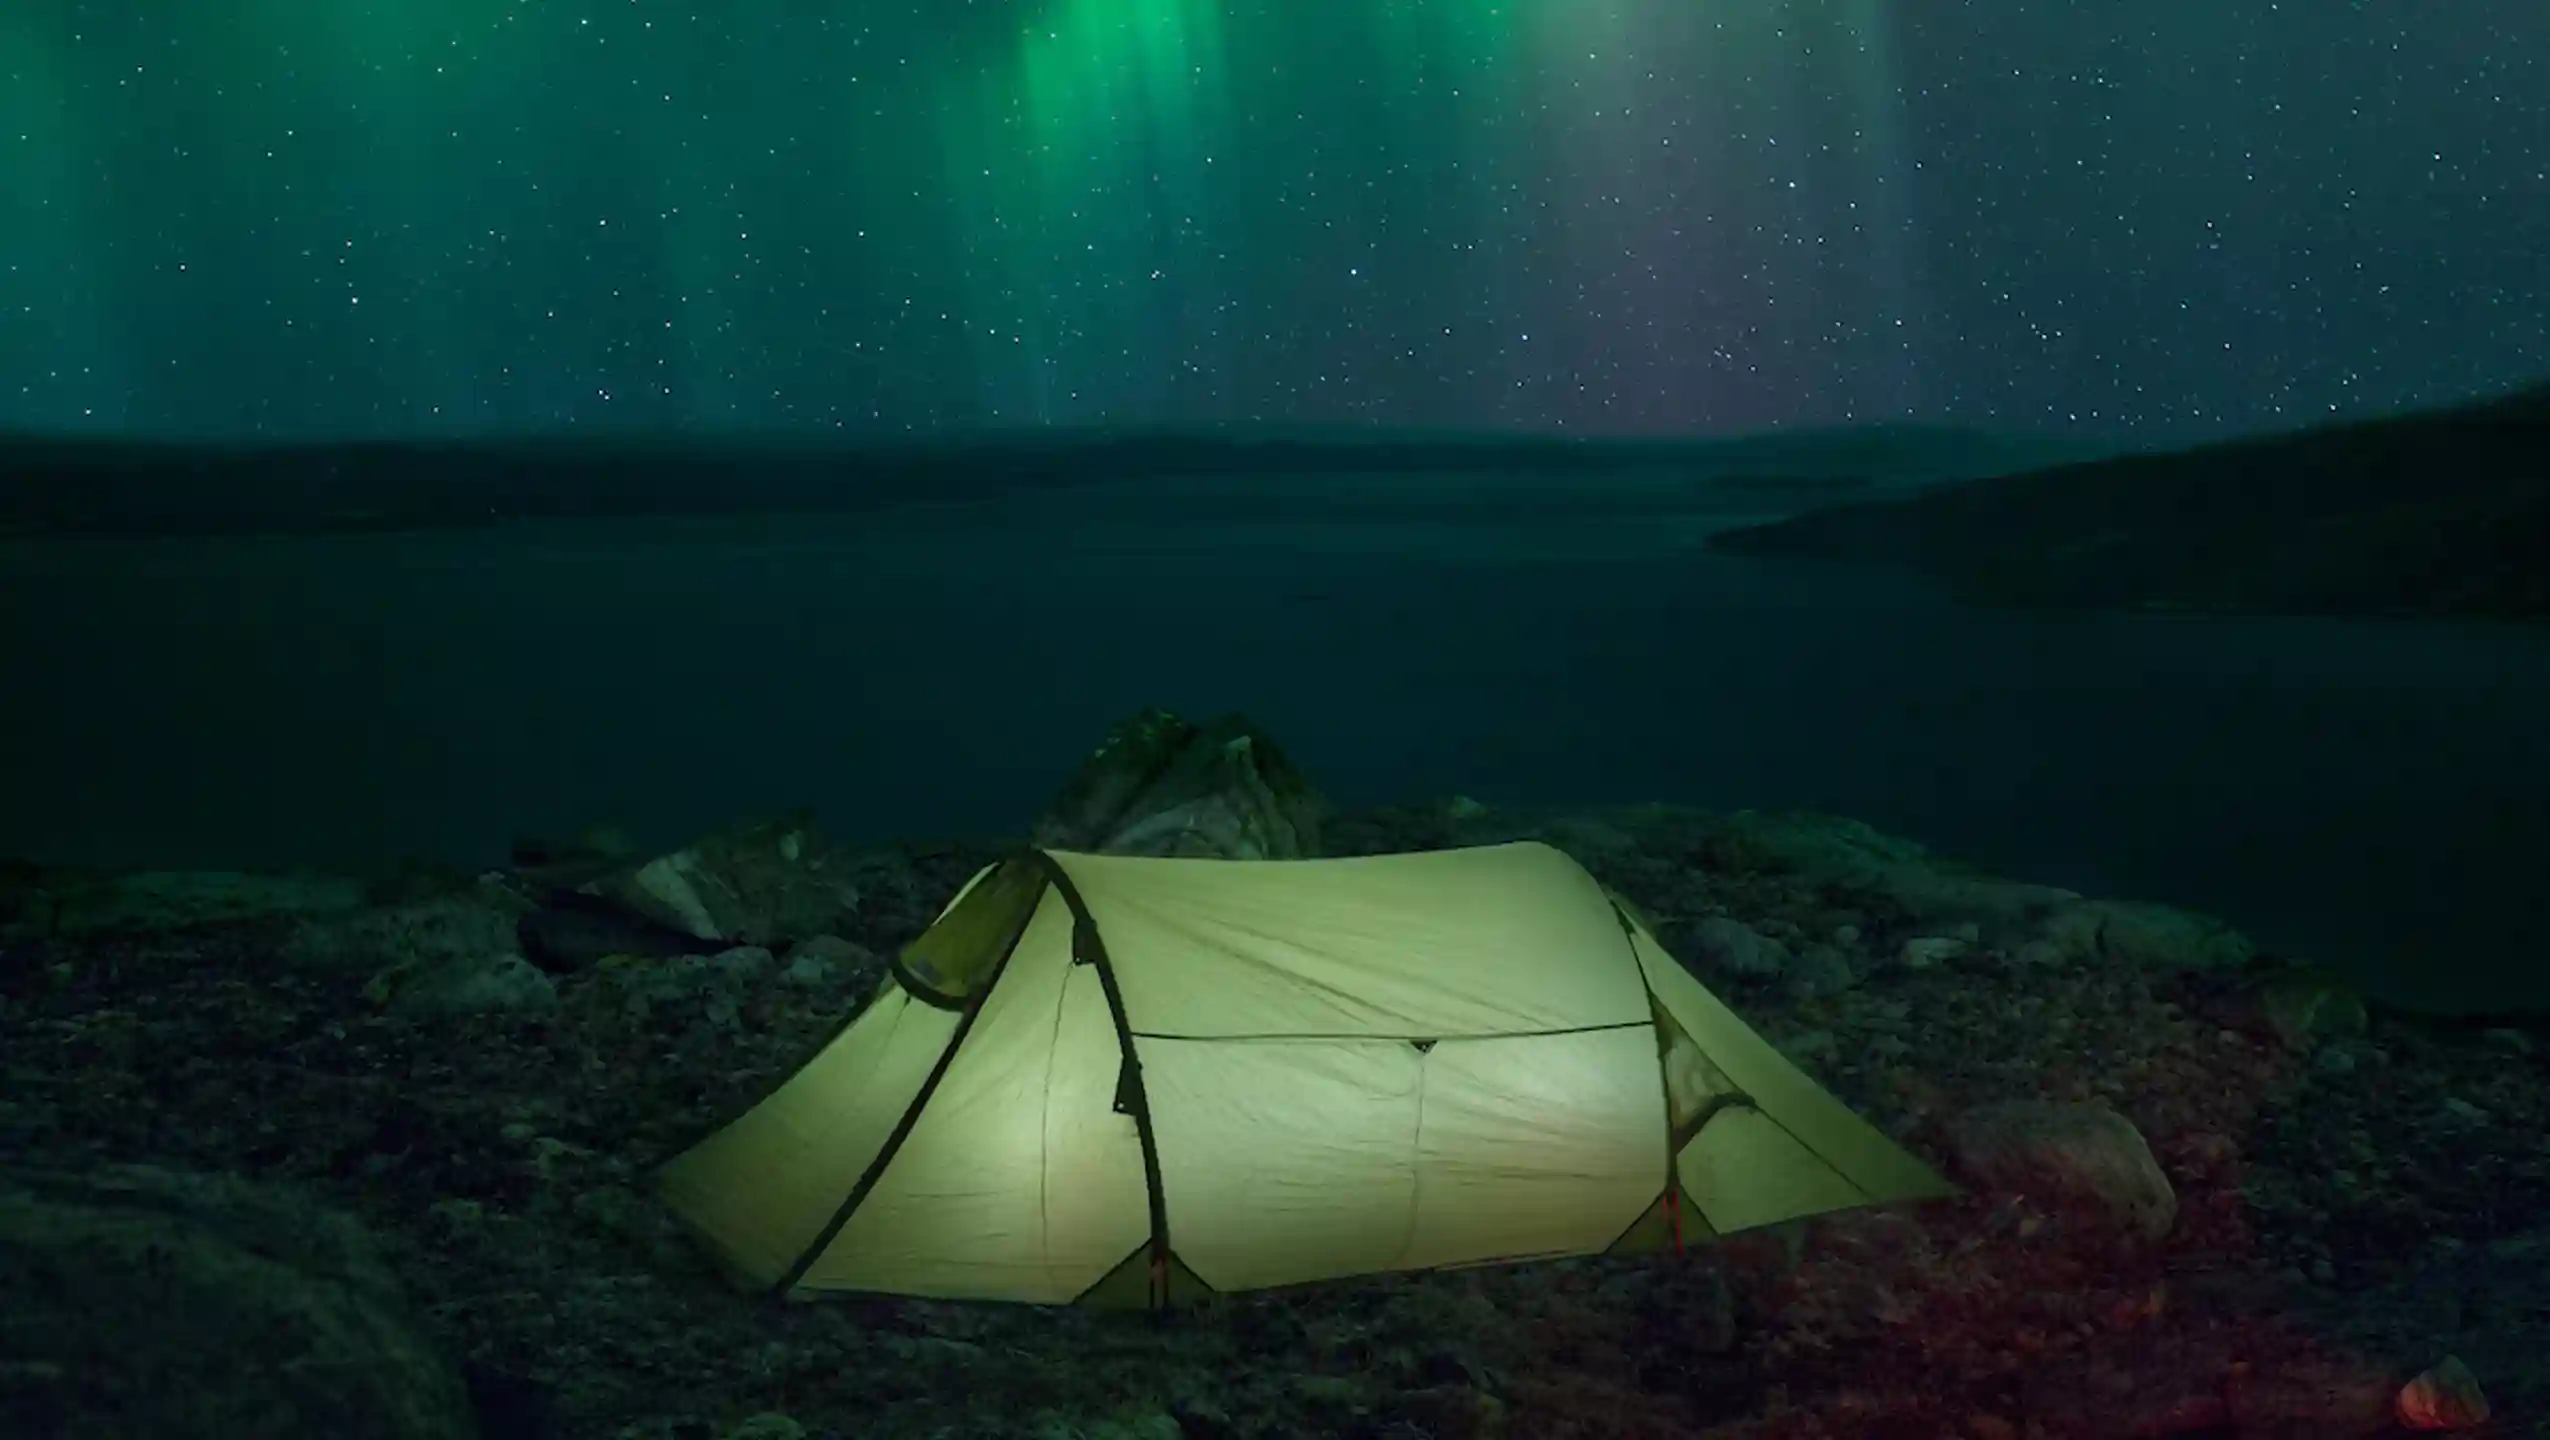 A Lamp Lit Tent Under The Northern Lights In Greenland Near Nuuk